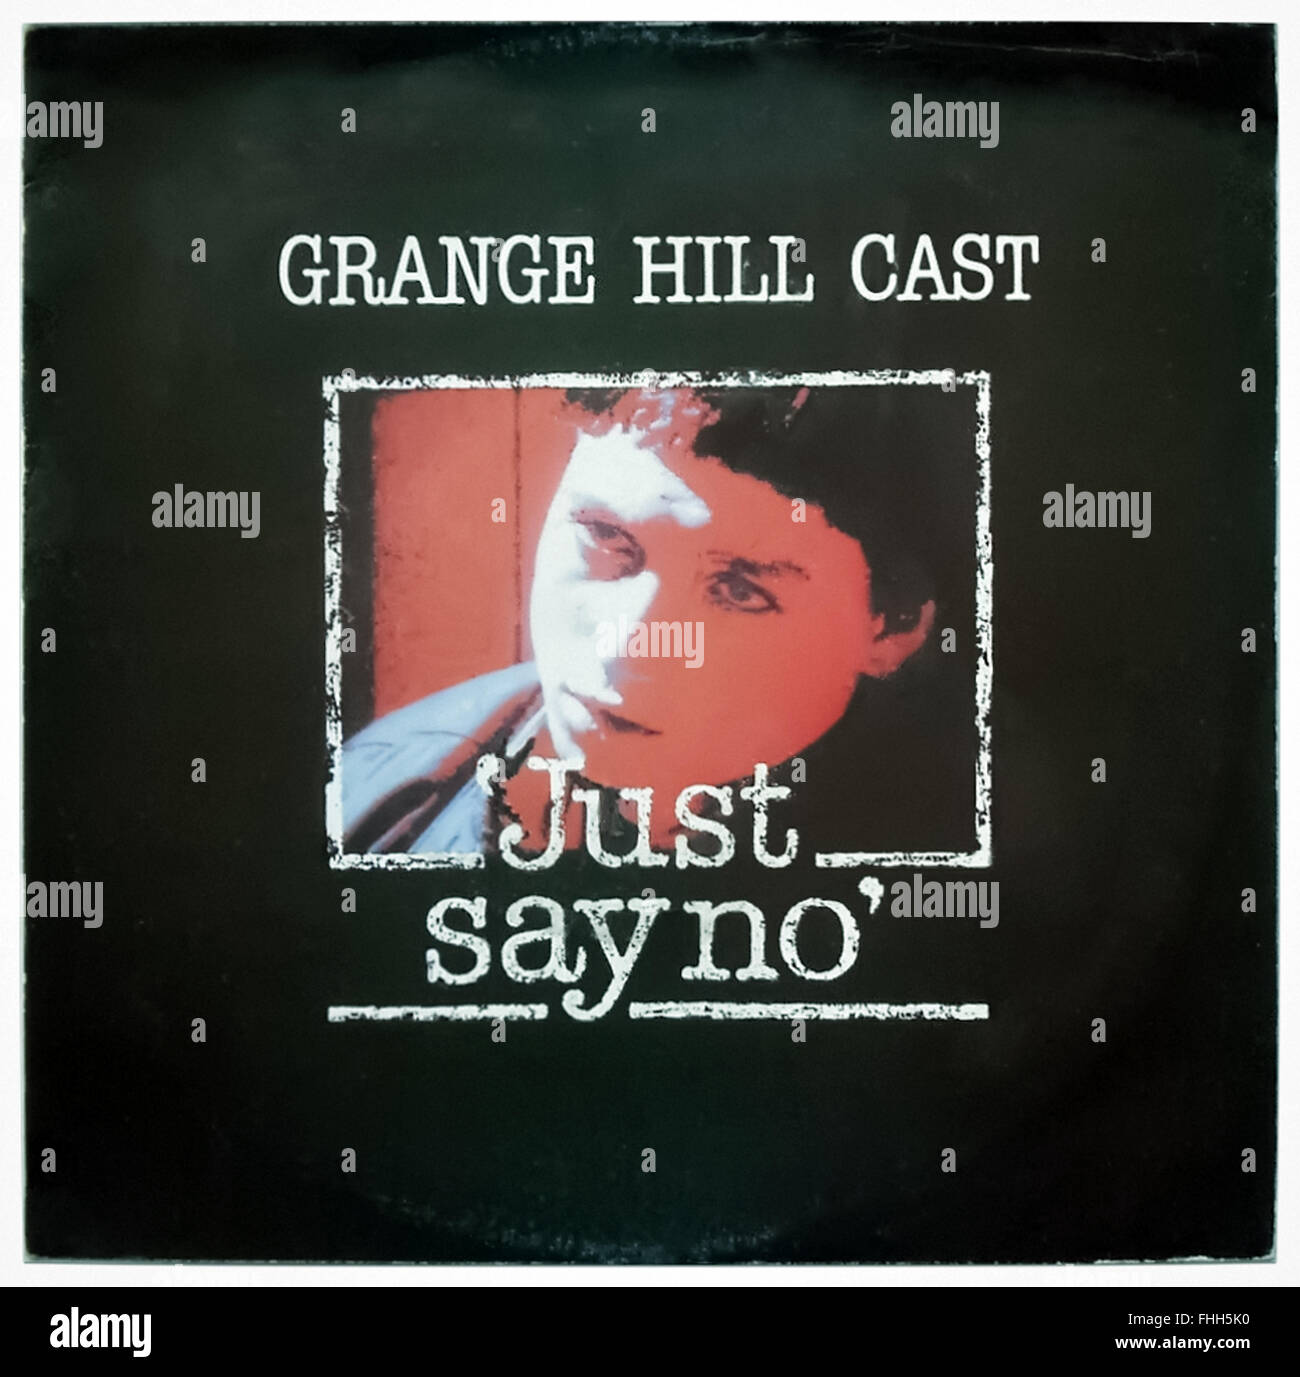 Front cover of classic Drug awareness track 'Just Say No' 7' Single released in 1986 performed by the cast of 'Grange Hill'. Cover features an image of Zammo McGuire (Lee Macdonald) who became addicted to heroin over the course of 2 seasons. The 'Just say no' slogan was part of the US war on drugs and crossed the pond in the mid 1980s and used by the BBC's 1986 'Drugwatch' campaign. The cast eventually flew to the US and visited the White House. See description for more information. Stock Photo